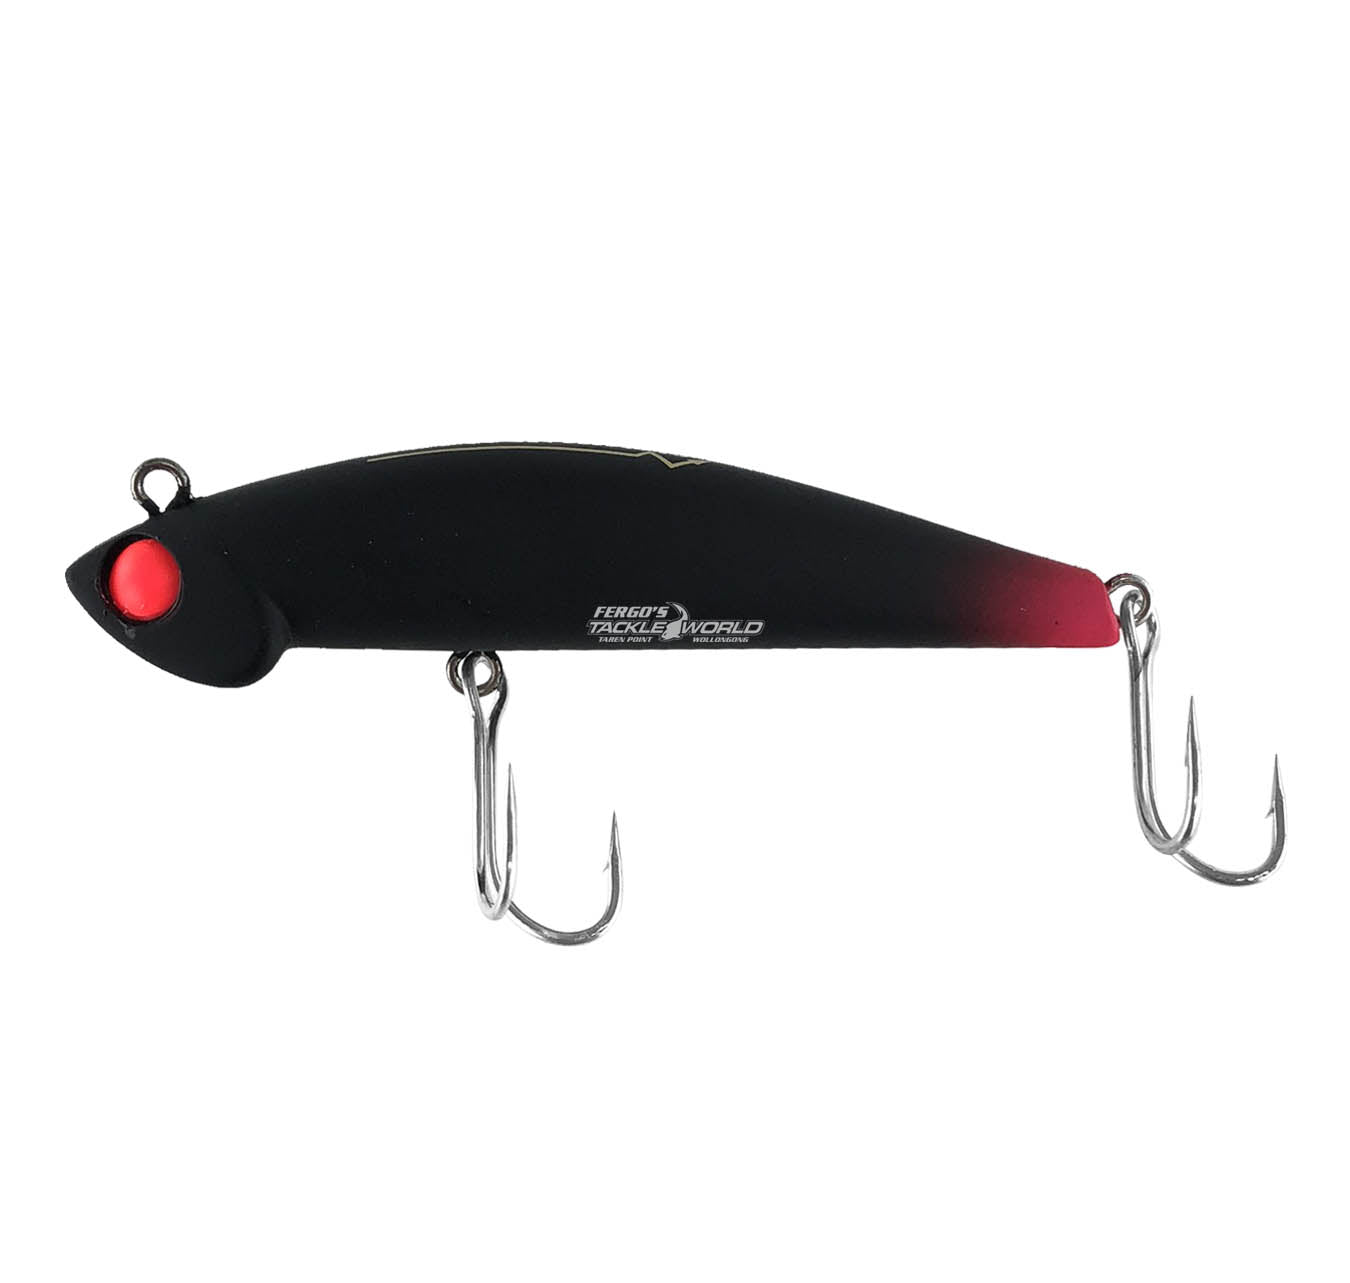 Saltwater Fishing Bait Hook Fishing Hooks for sale, Shop with Afterpay